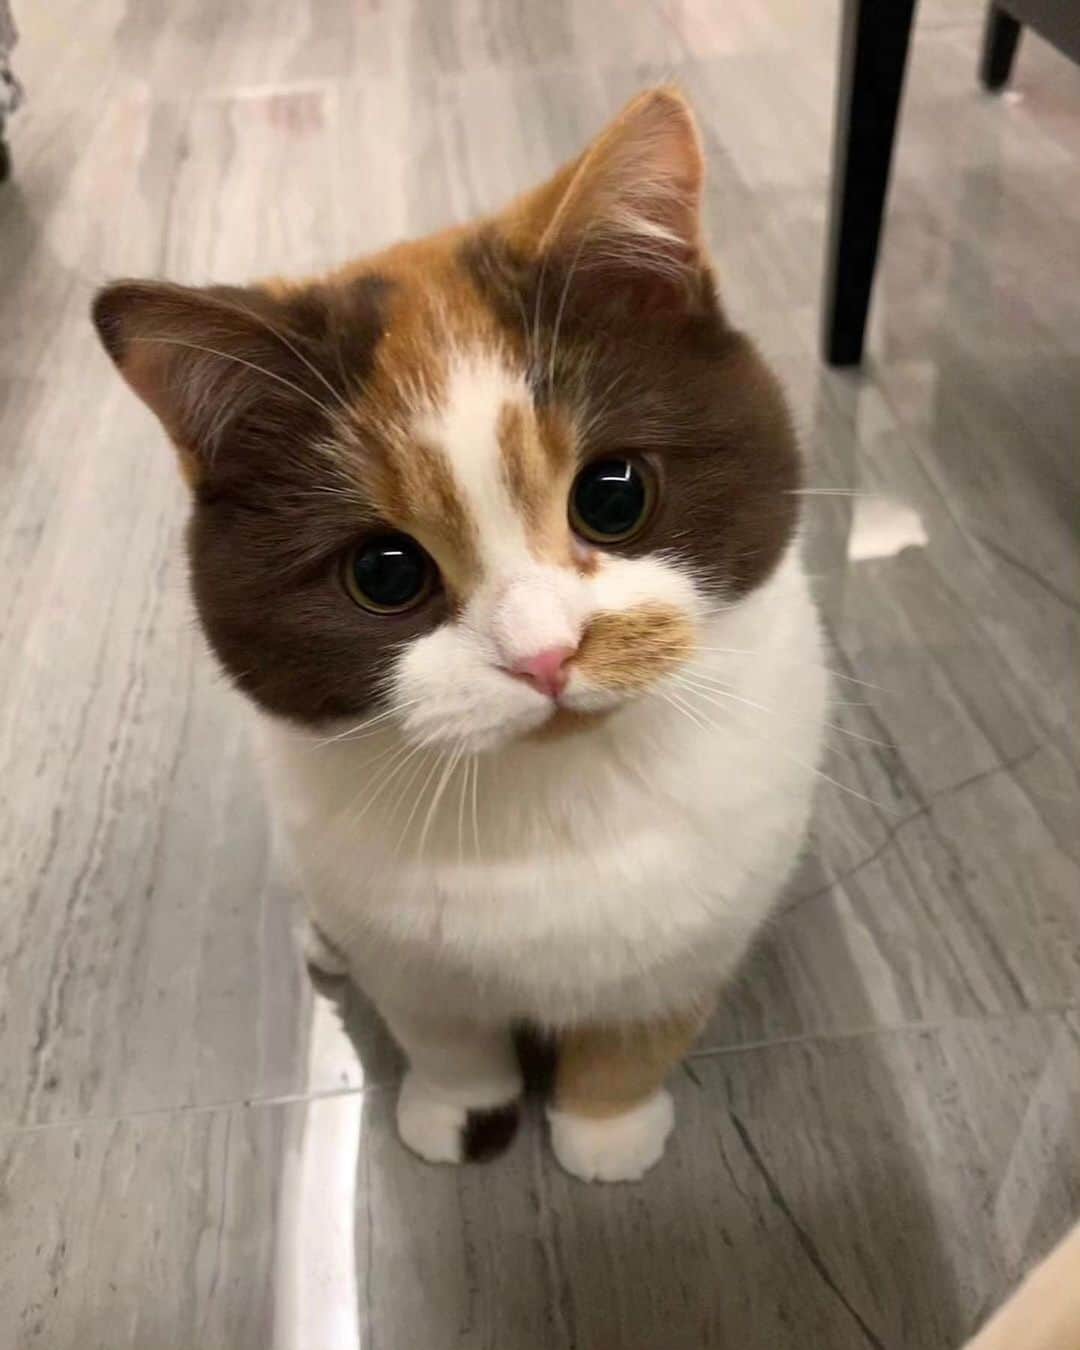 Cute Pets Dogs Catsのインスタグラム：「I want one that color and those eyes 🥰  Credit: @麻薯小卷 | DY ** For all crediting issues and removals pls 𝐄𝐦𝐚𝐢𝐥 𝐮𝐬 ☺️  𝐍𝐨𝐭𝐞: we don’t own this video/pics, all rights go to their respective owners. If owner is not provided, tagged (meaning we couldn’t find who is the owner), 𝐩𝐥𝐬 𝐄𝐦𝐚𝐢𝐥 𝐮𝐬 with 𝐬𝐮𝐛𝐣𝐞𝐜𝐭 “𝐂𝐫𝐞𝐝𝐢𝐭 𝐈𝐬𝐬𝐮𝐞𝐬” and 𝐨𝐰𝐧𝐞𝐫 𝐰𝐢𝐥𝐥 𝐛𝐞 𝐭𝐚𝐠𝐠𝐞𝐝 𝐬𝐡𝐨𝐫𝐭𝐥𝐲 𝐚𝐟𝐭𝐞𝐫.  We have been building this community for over 6 years, but 𝐞𝐯𝐞𝐫𝐲 𝐫𝐞𝐩𝐨𝐫𝐭 𝐜𝐨𝐮𝐥𝐝 𝐠𝐞𝐭 𝐨𝐮𝐫 𝐩𝐚𝐠𝐞 𝐝𝐞𝐥𝐞𝐭𝐞𝐝, pls email us first. **」